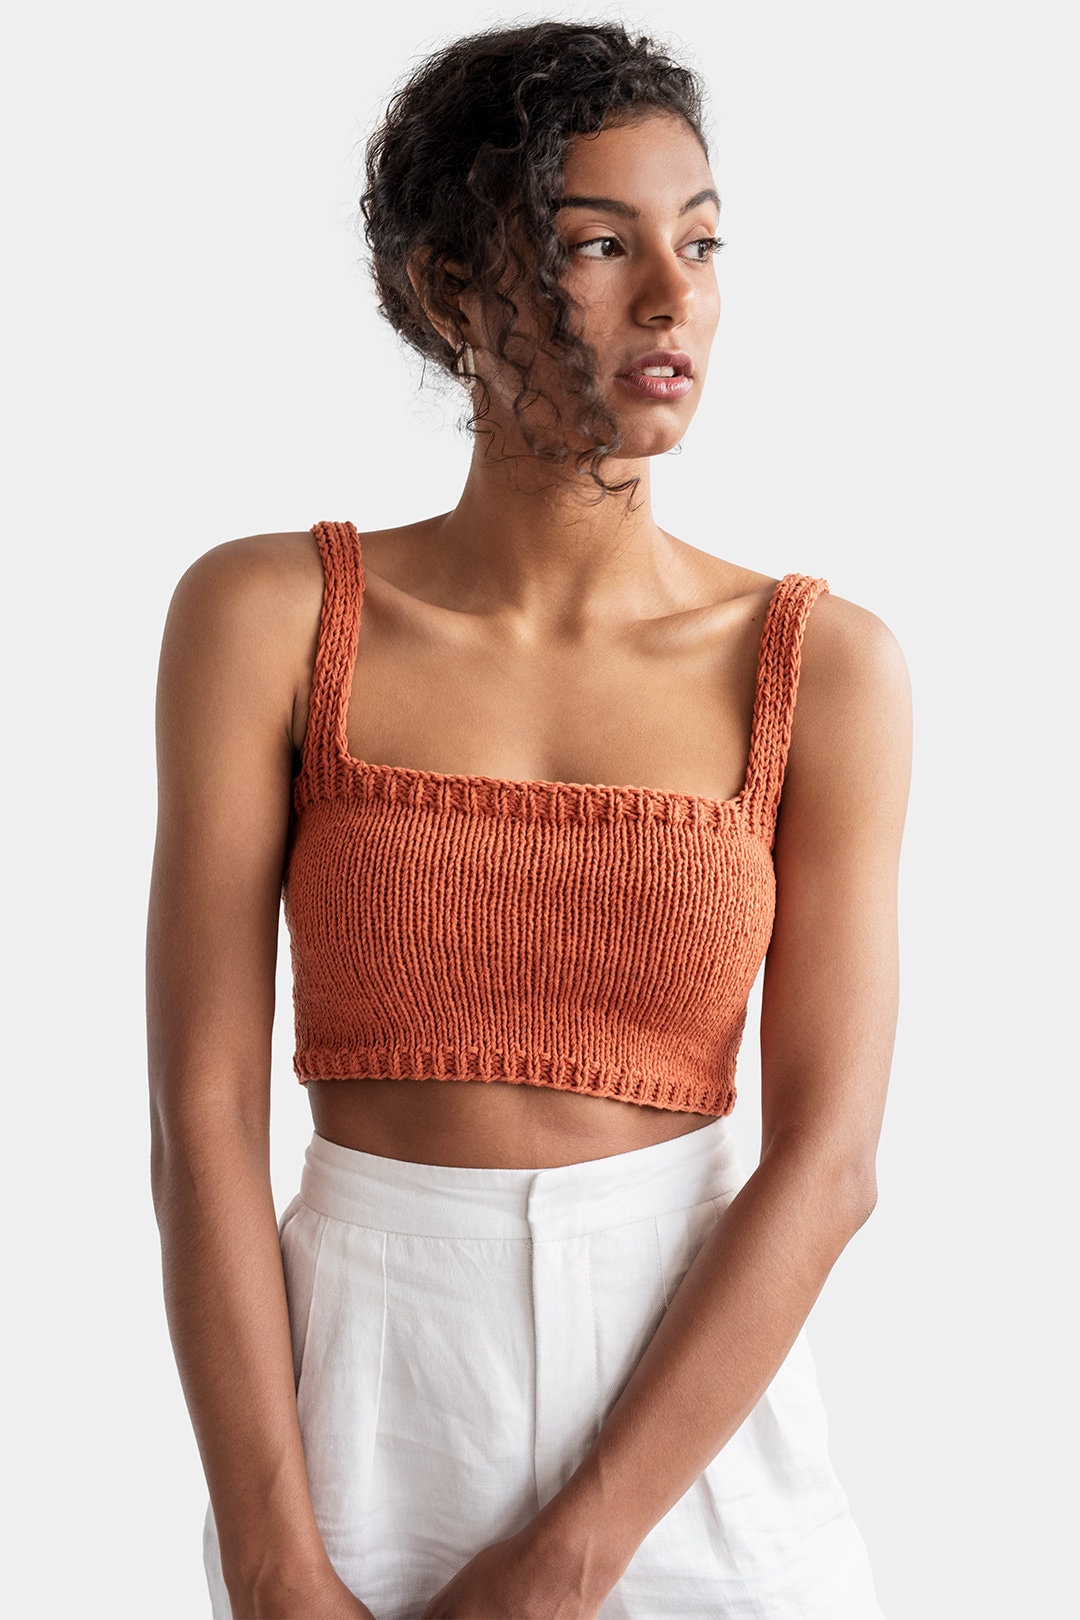 ZARA Blue Ribbed Knit Crop Top With Straight Neckline And Spaghetti Straps  M